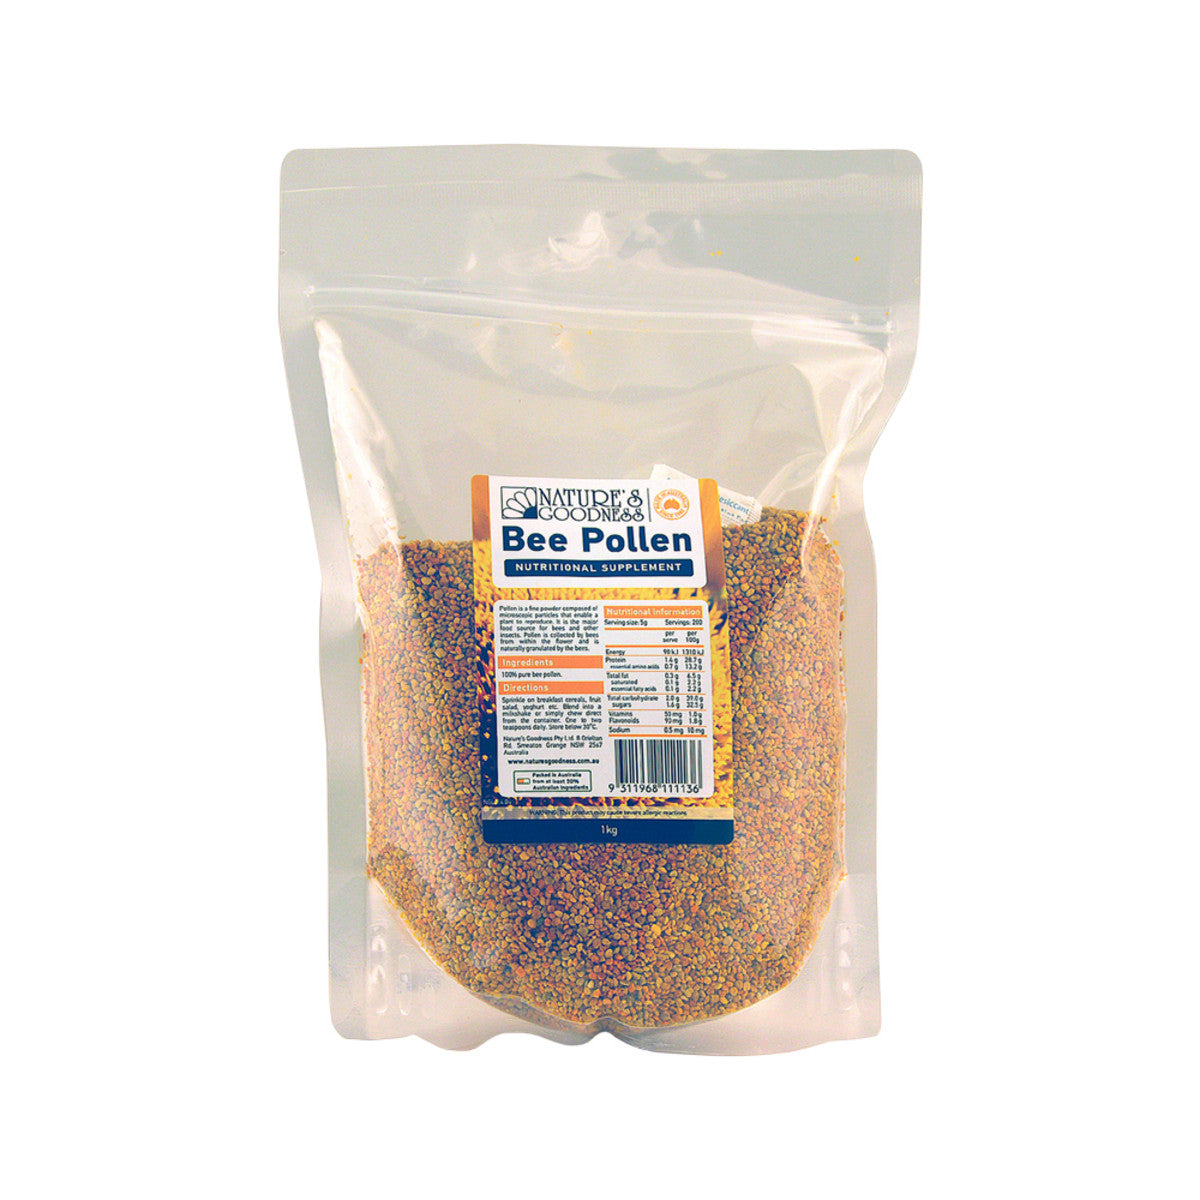 NATURE'S GOODNESS Bee Pollen 1kg